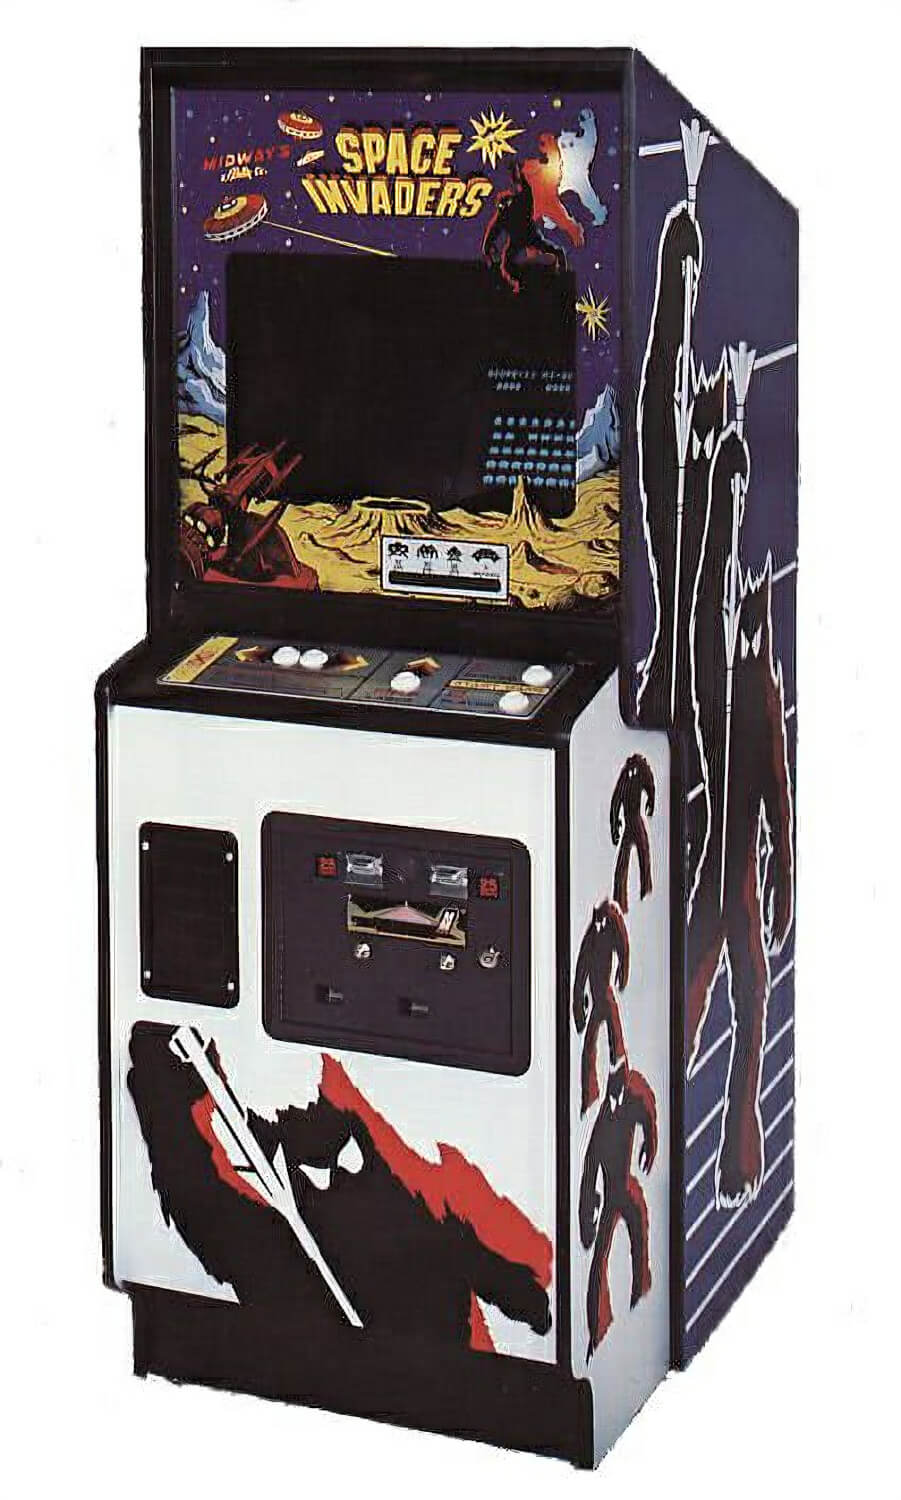 Midway Space Invaders Arcade Machine | Liberty Games